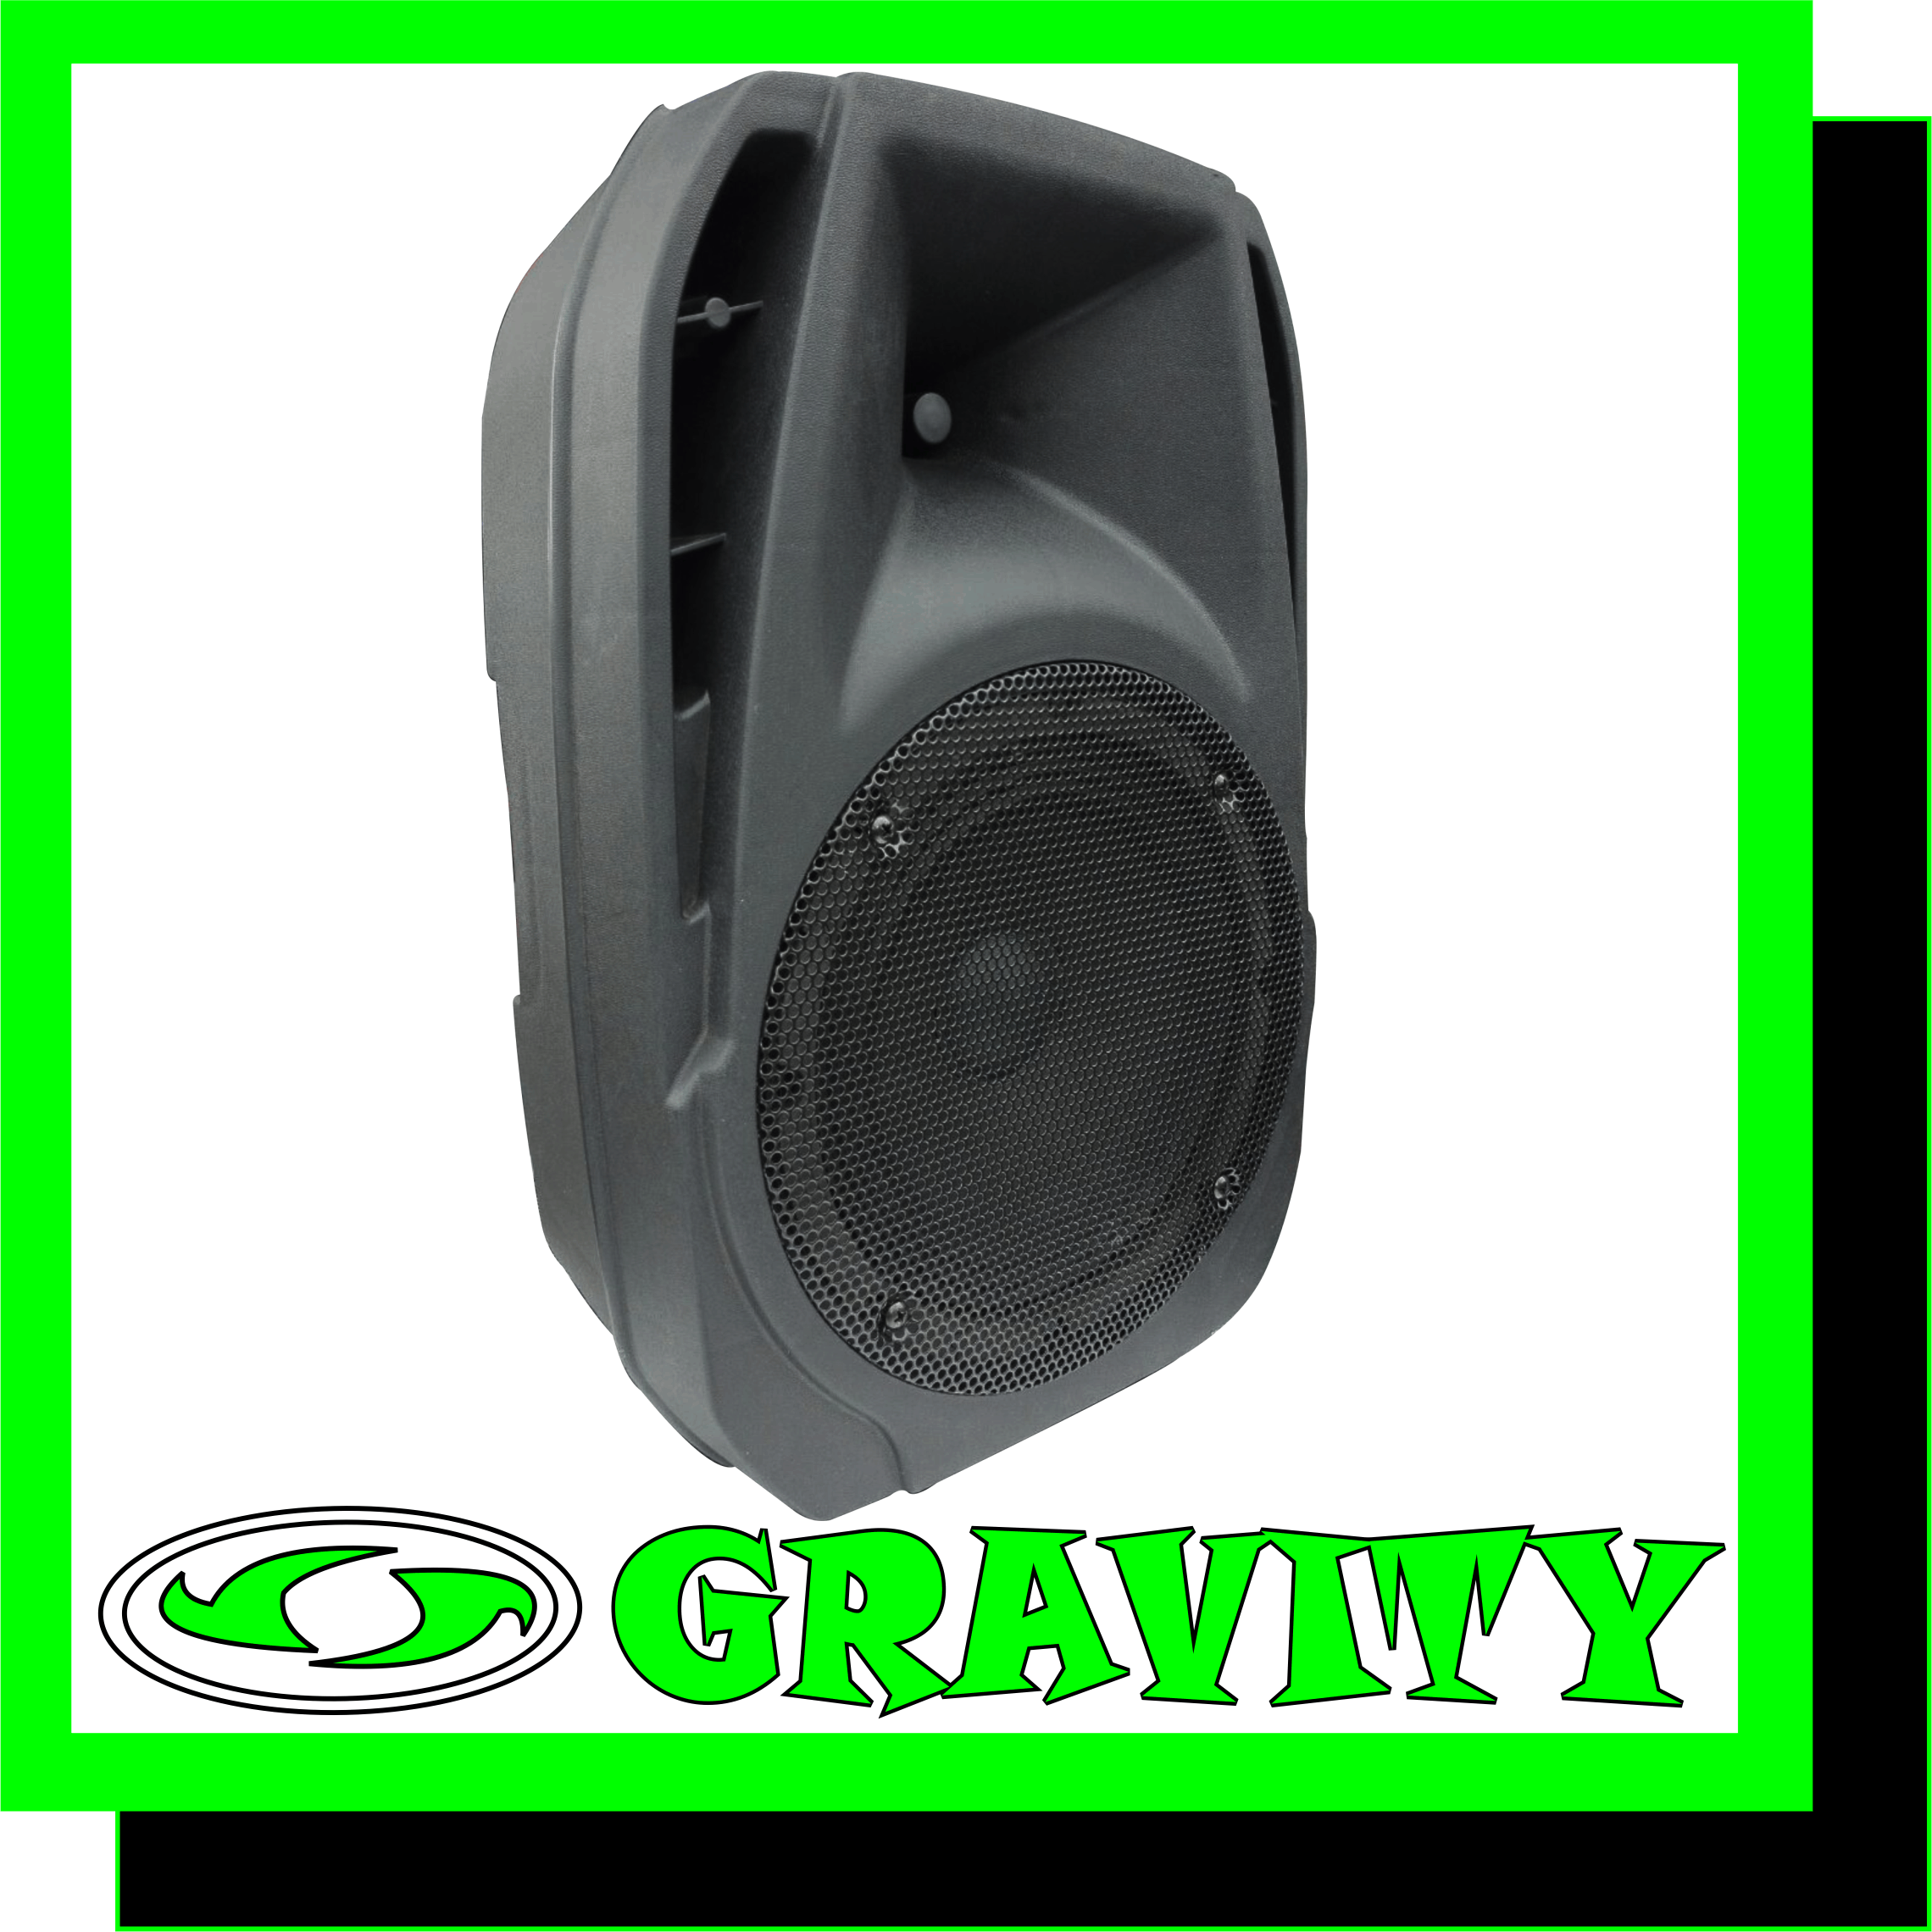 8inch PLASTIC MOULDED SPEAKER   2way PLASTIC MOULDED SPEAKER   150w SPEAKER  IMPEDENCE : 8ohm PA PAGING INTERCOM SYSTEM GRAVITY SOUND AND LIGHTING WAREHOUSE 0315072463